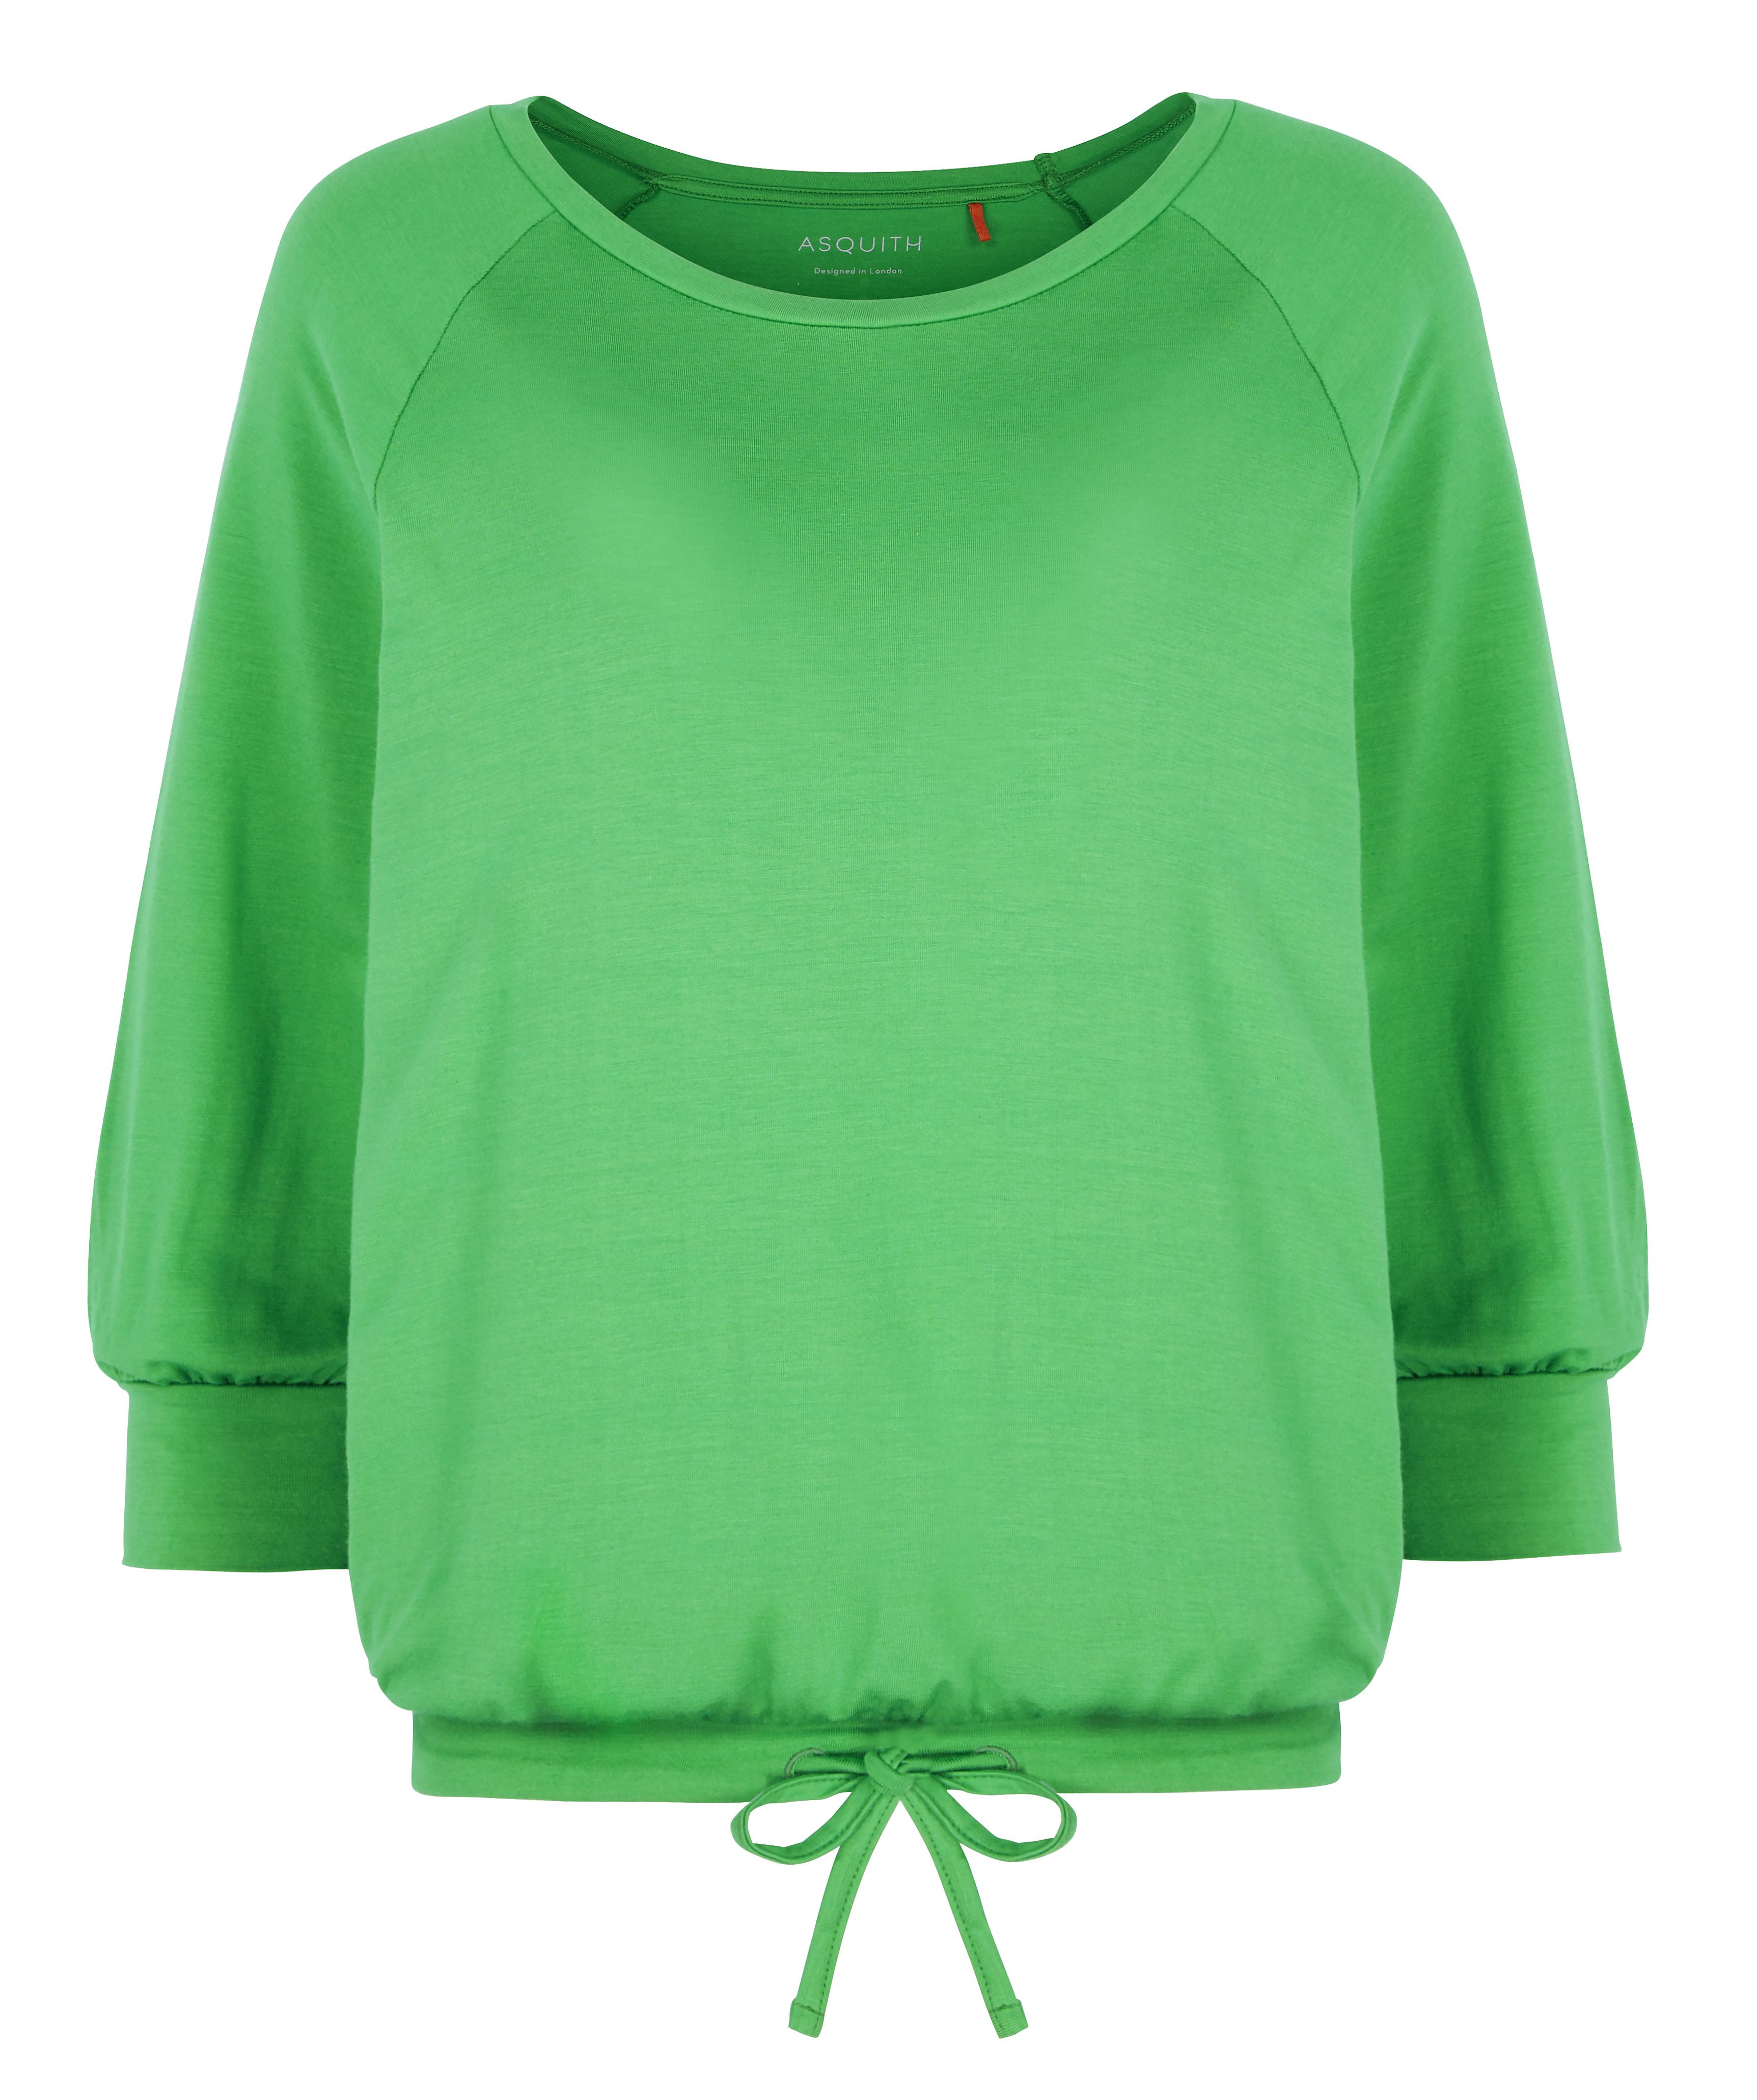 Asquith Embrace Tee - Emerald